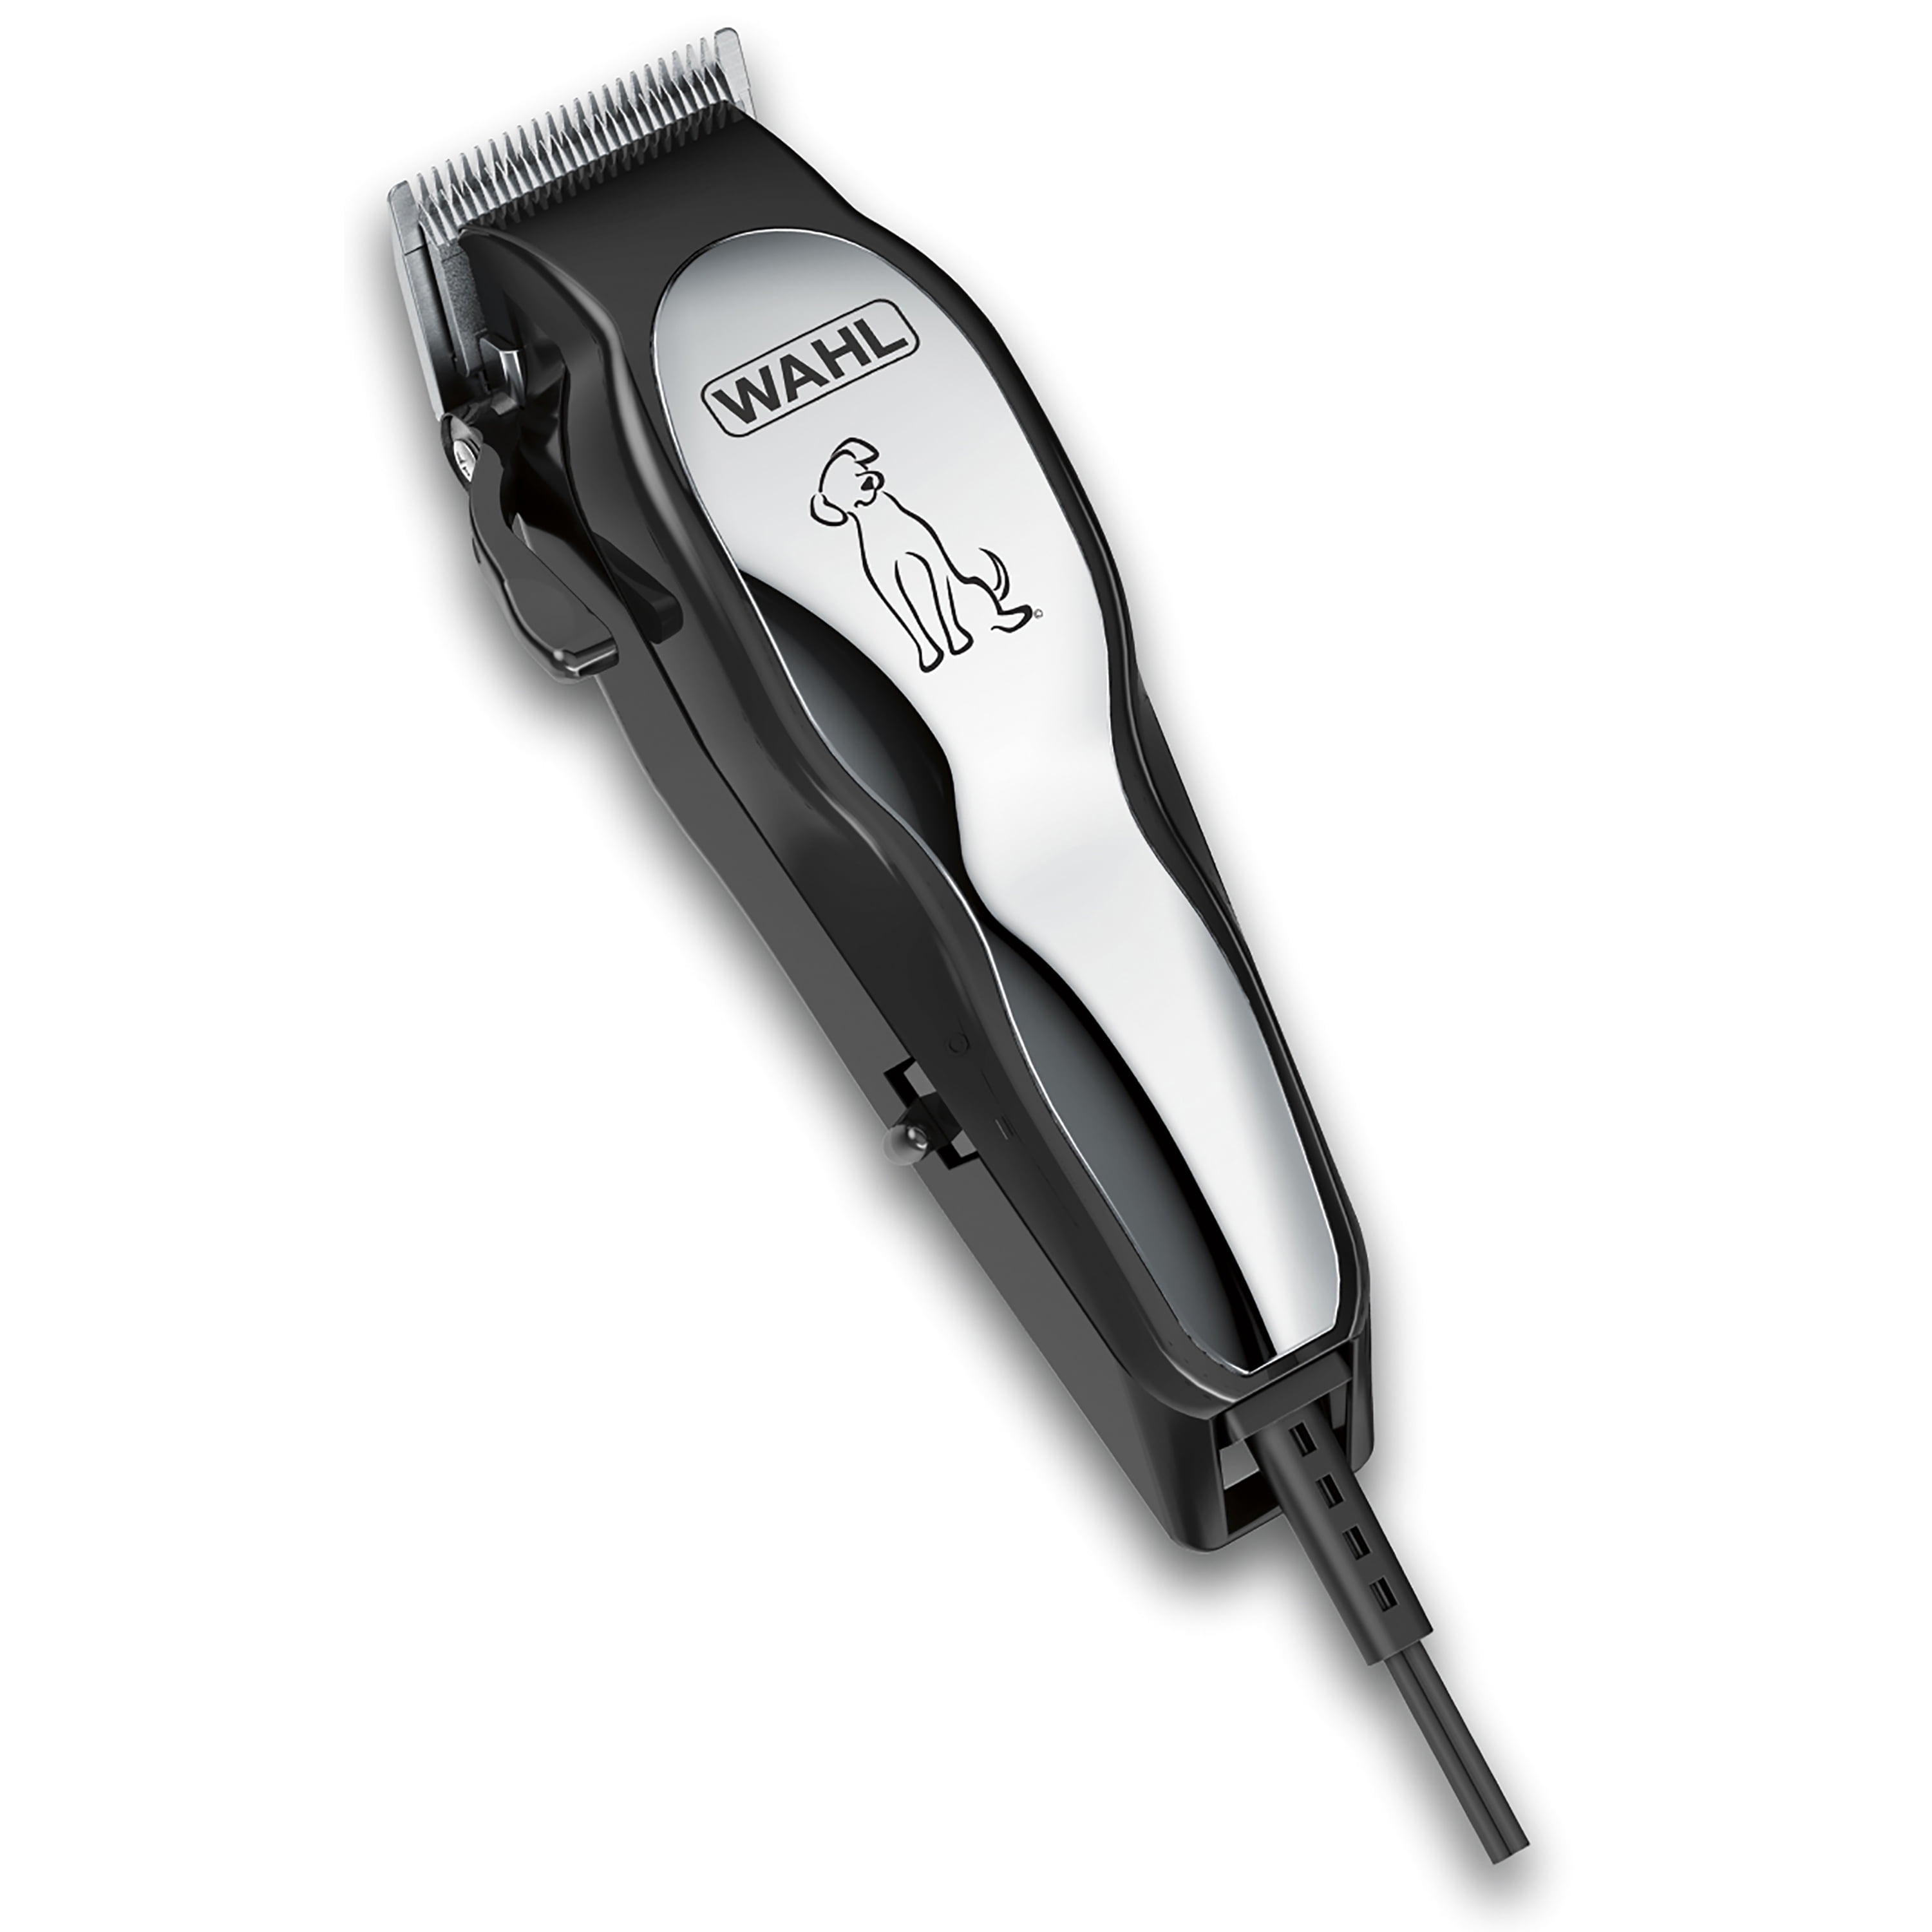 Model 9281-210 Wahl Clipper Pet-Pro Dog Grooming Kit Quiet Heavy-Duty Electric Dog Clipper for Dogs & Cats with Thick & Heavy Coats 